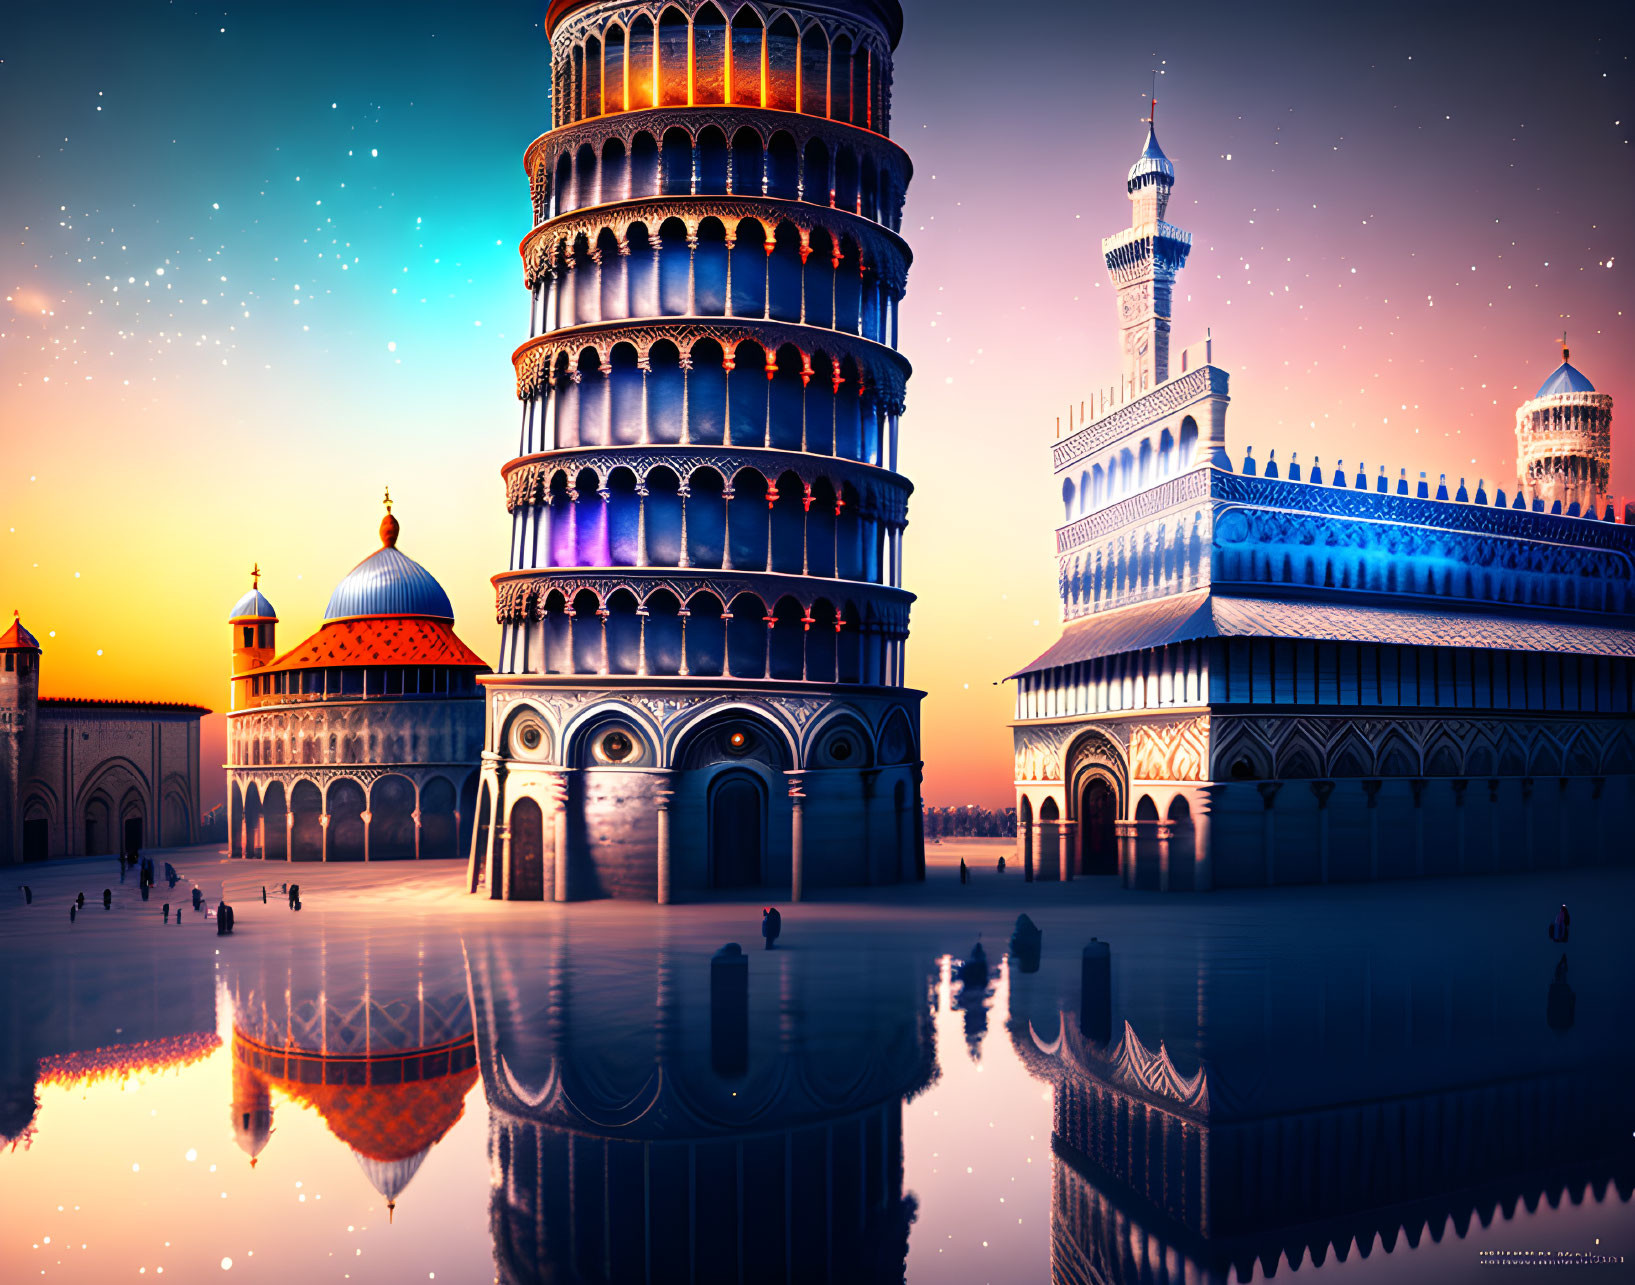 Detailed artistic rendering of Pisa tower and architecture on glossy surface under twilight sky